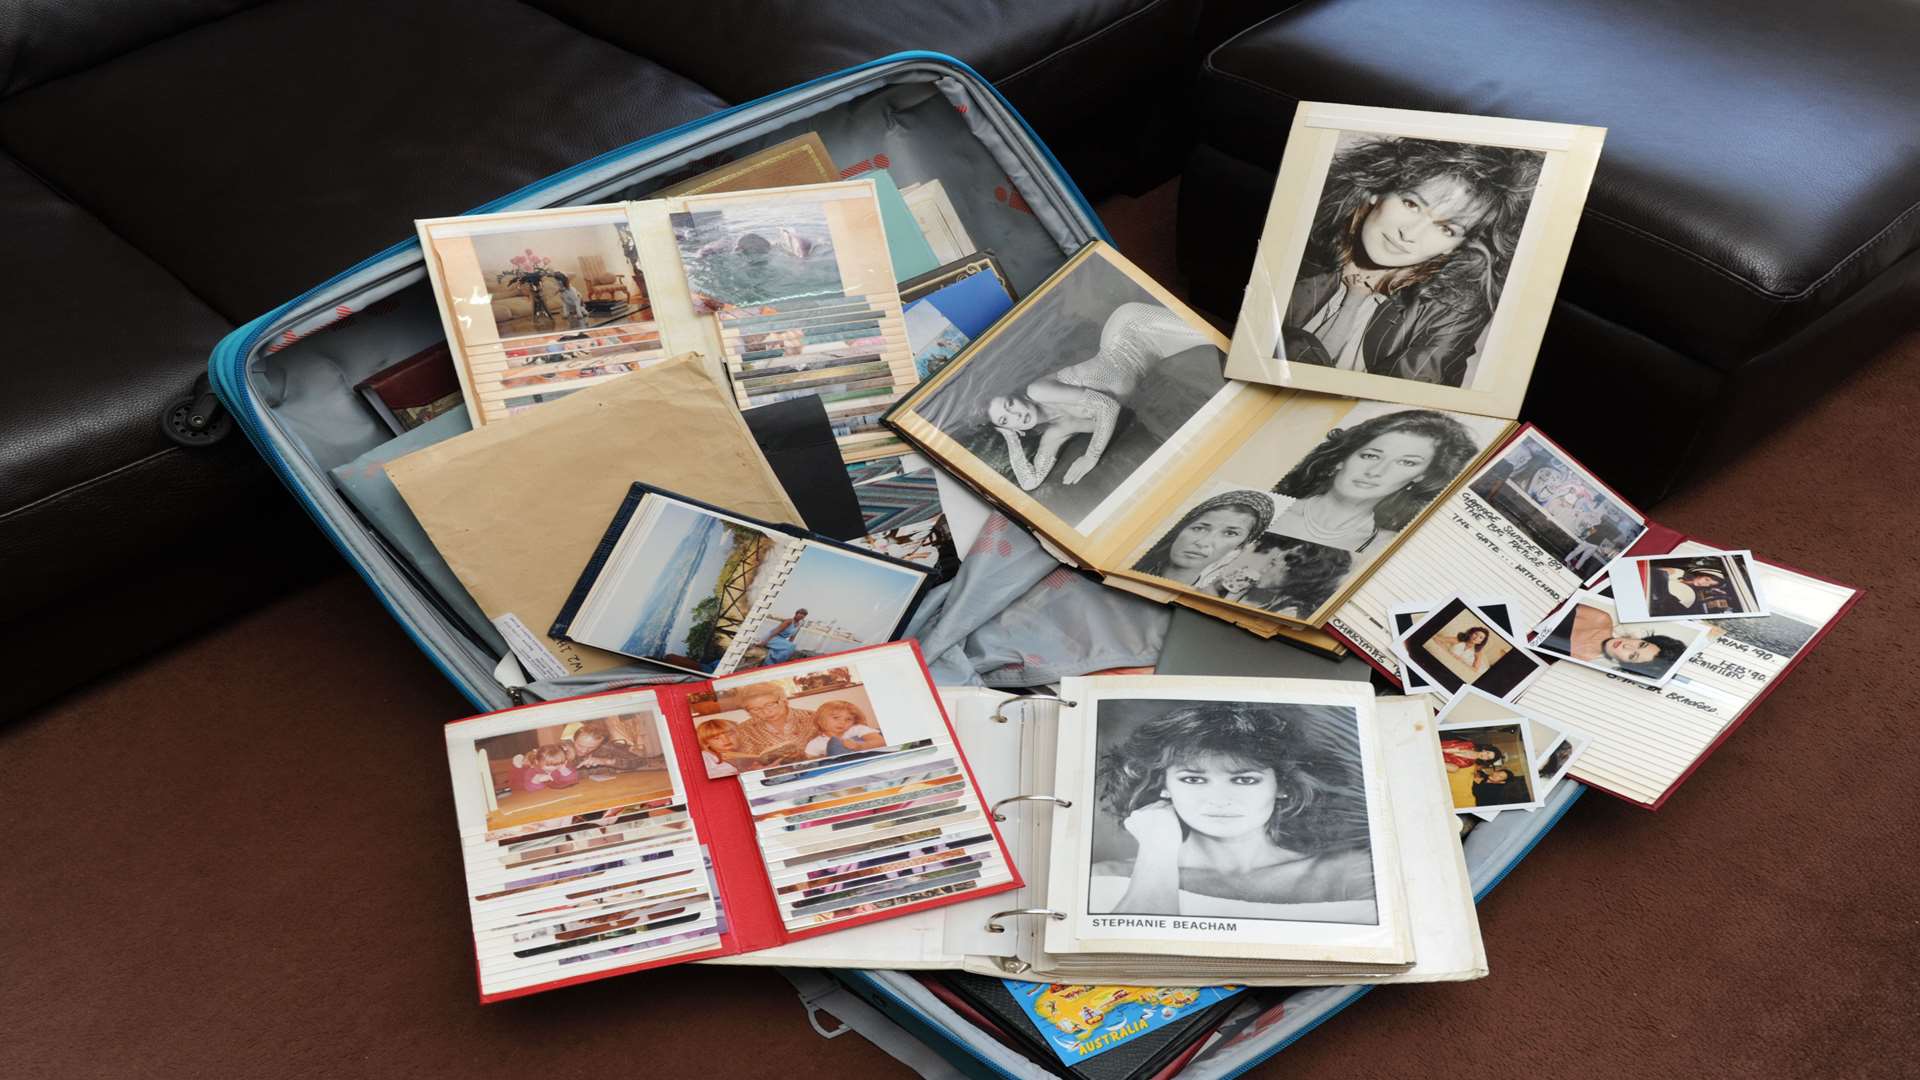 A suitcase in amongst a pile of fly-tipped rubbish contained thousands of pictures of actress Stephanie Beacham